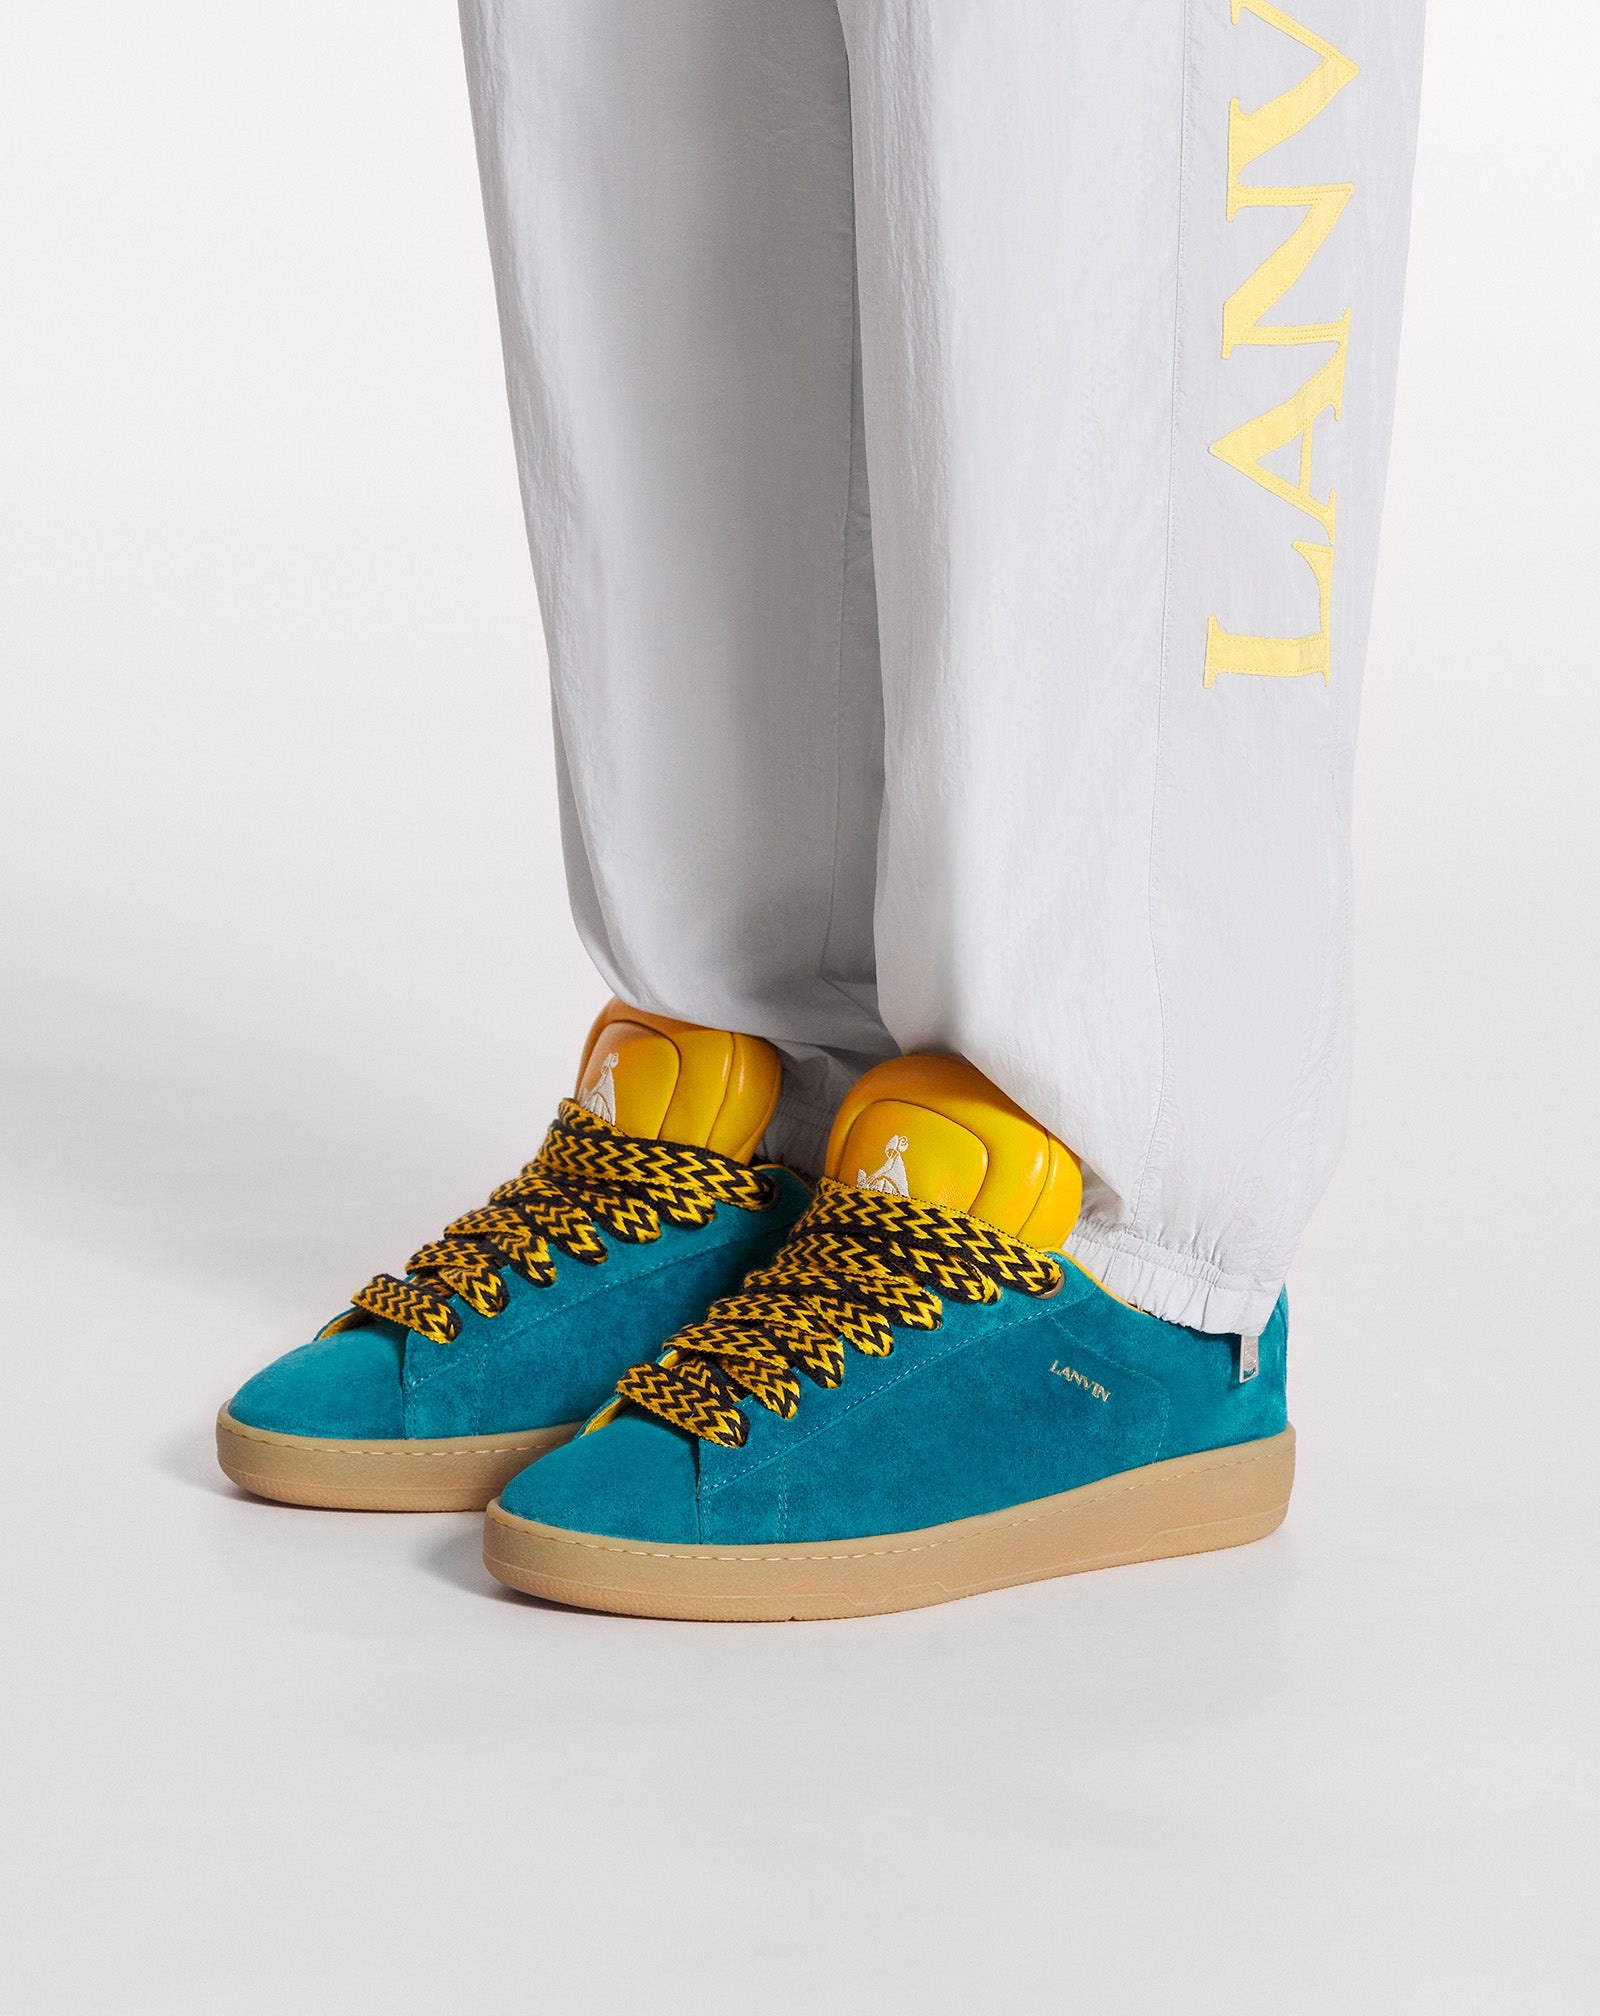 LANVIN X FUTURE HYPER CURB SNEAKERS IN LEATHER AND SUEDE FOR WOMEN - 6